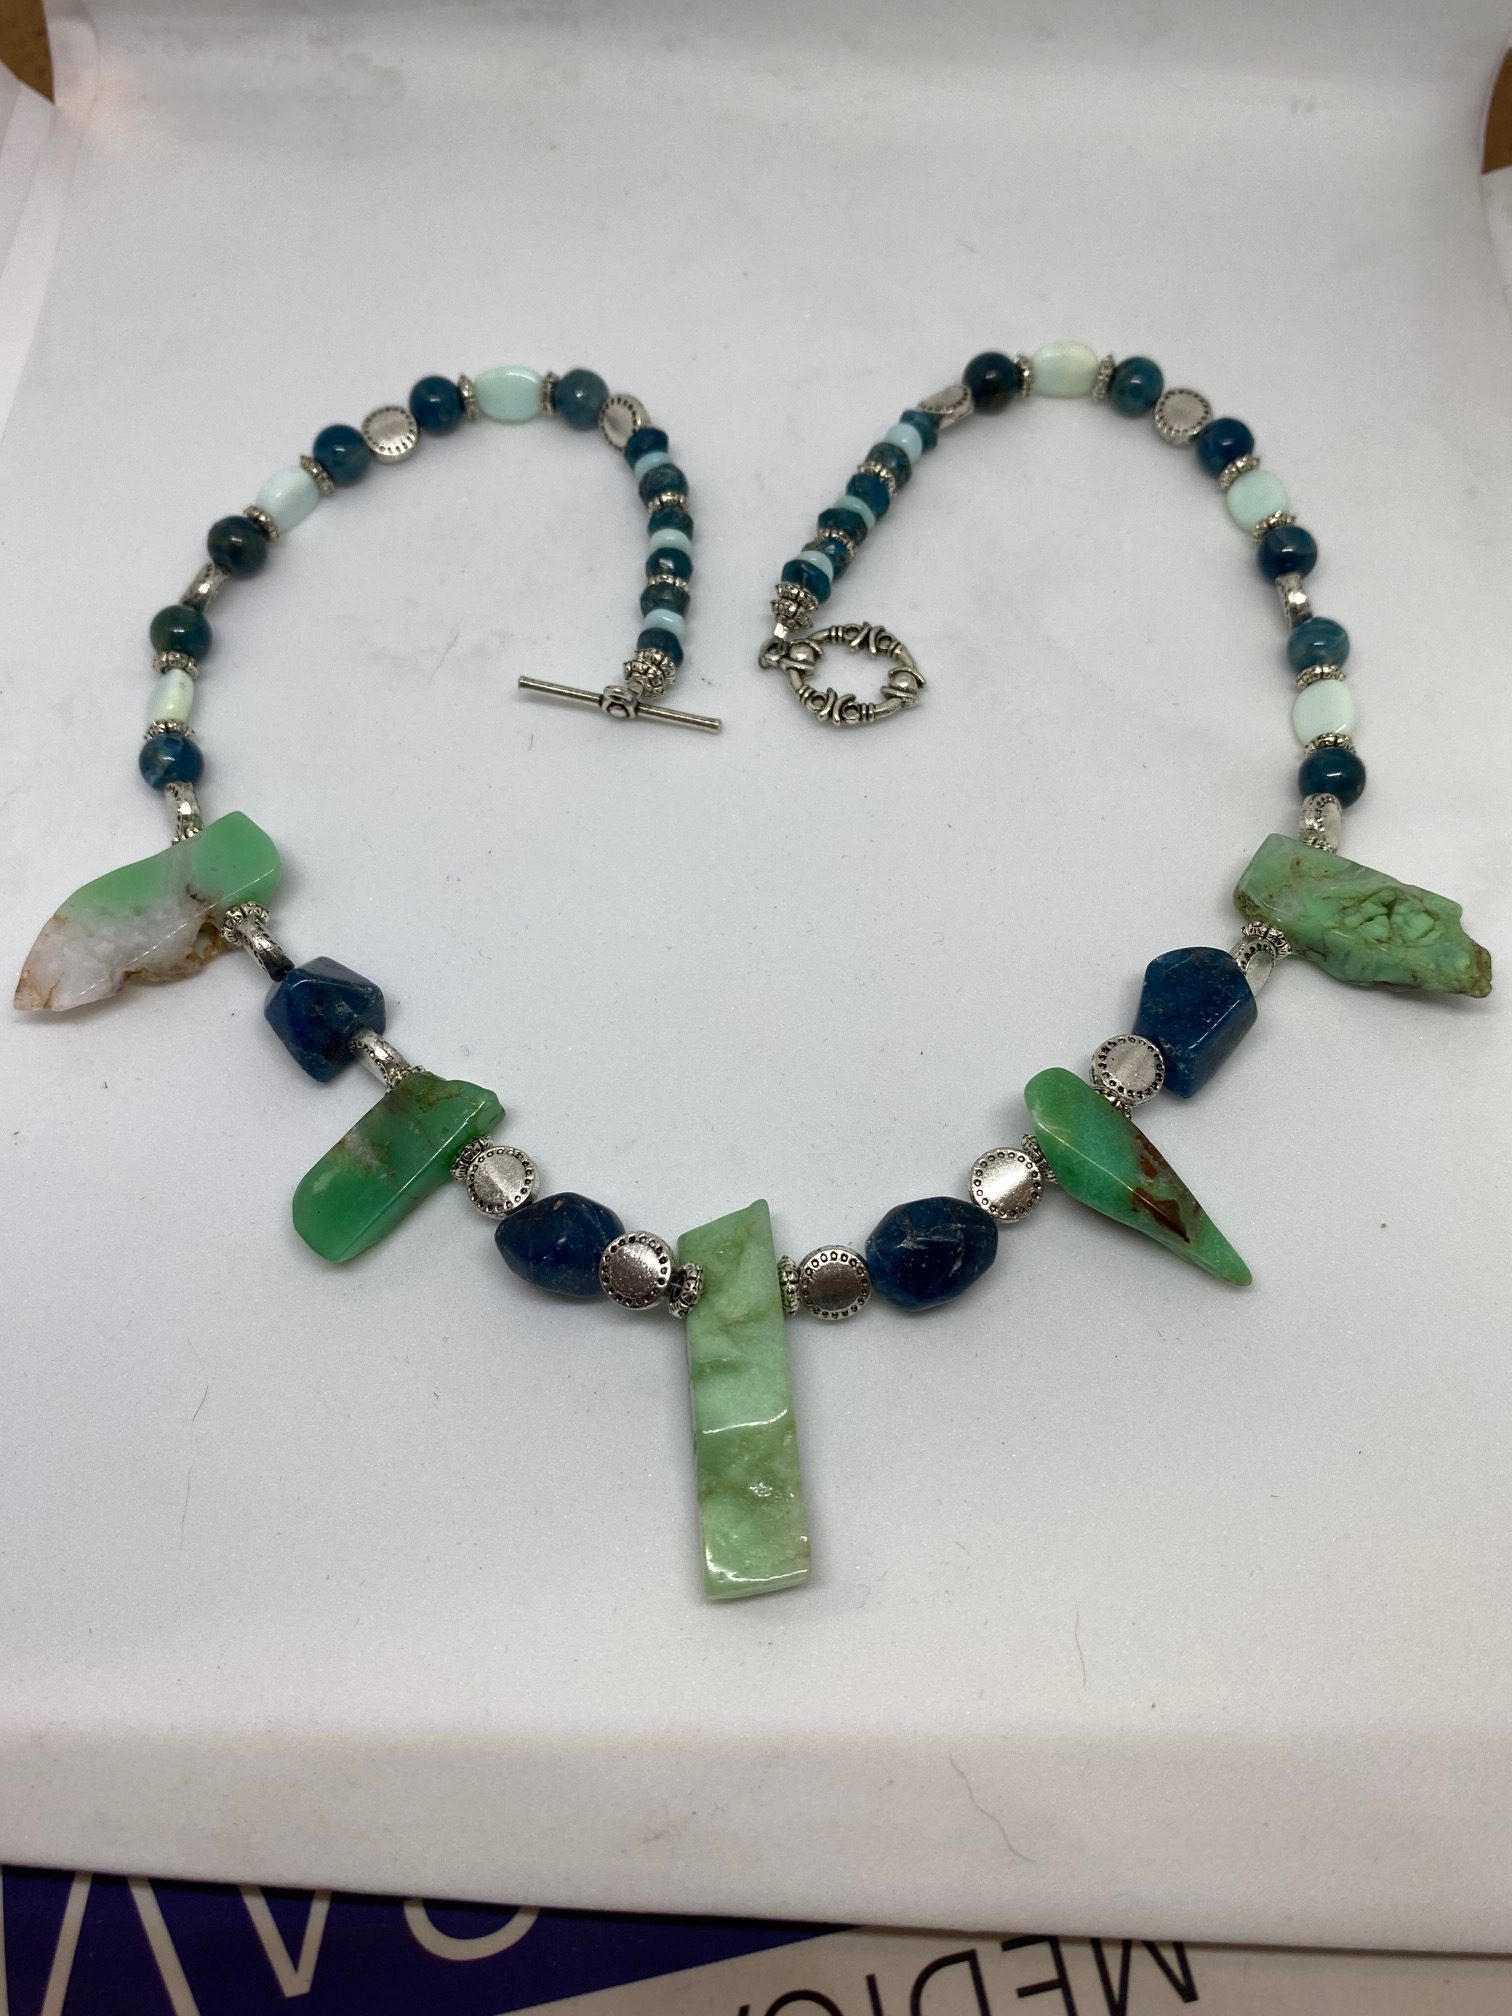 Chrysoprase, Apatite and Hemimorphite Necklace Promotes Happiness and Joy on All Levels!